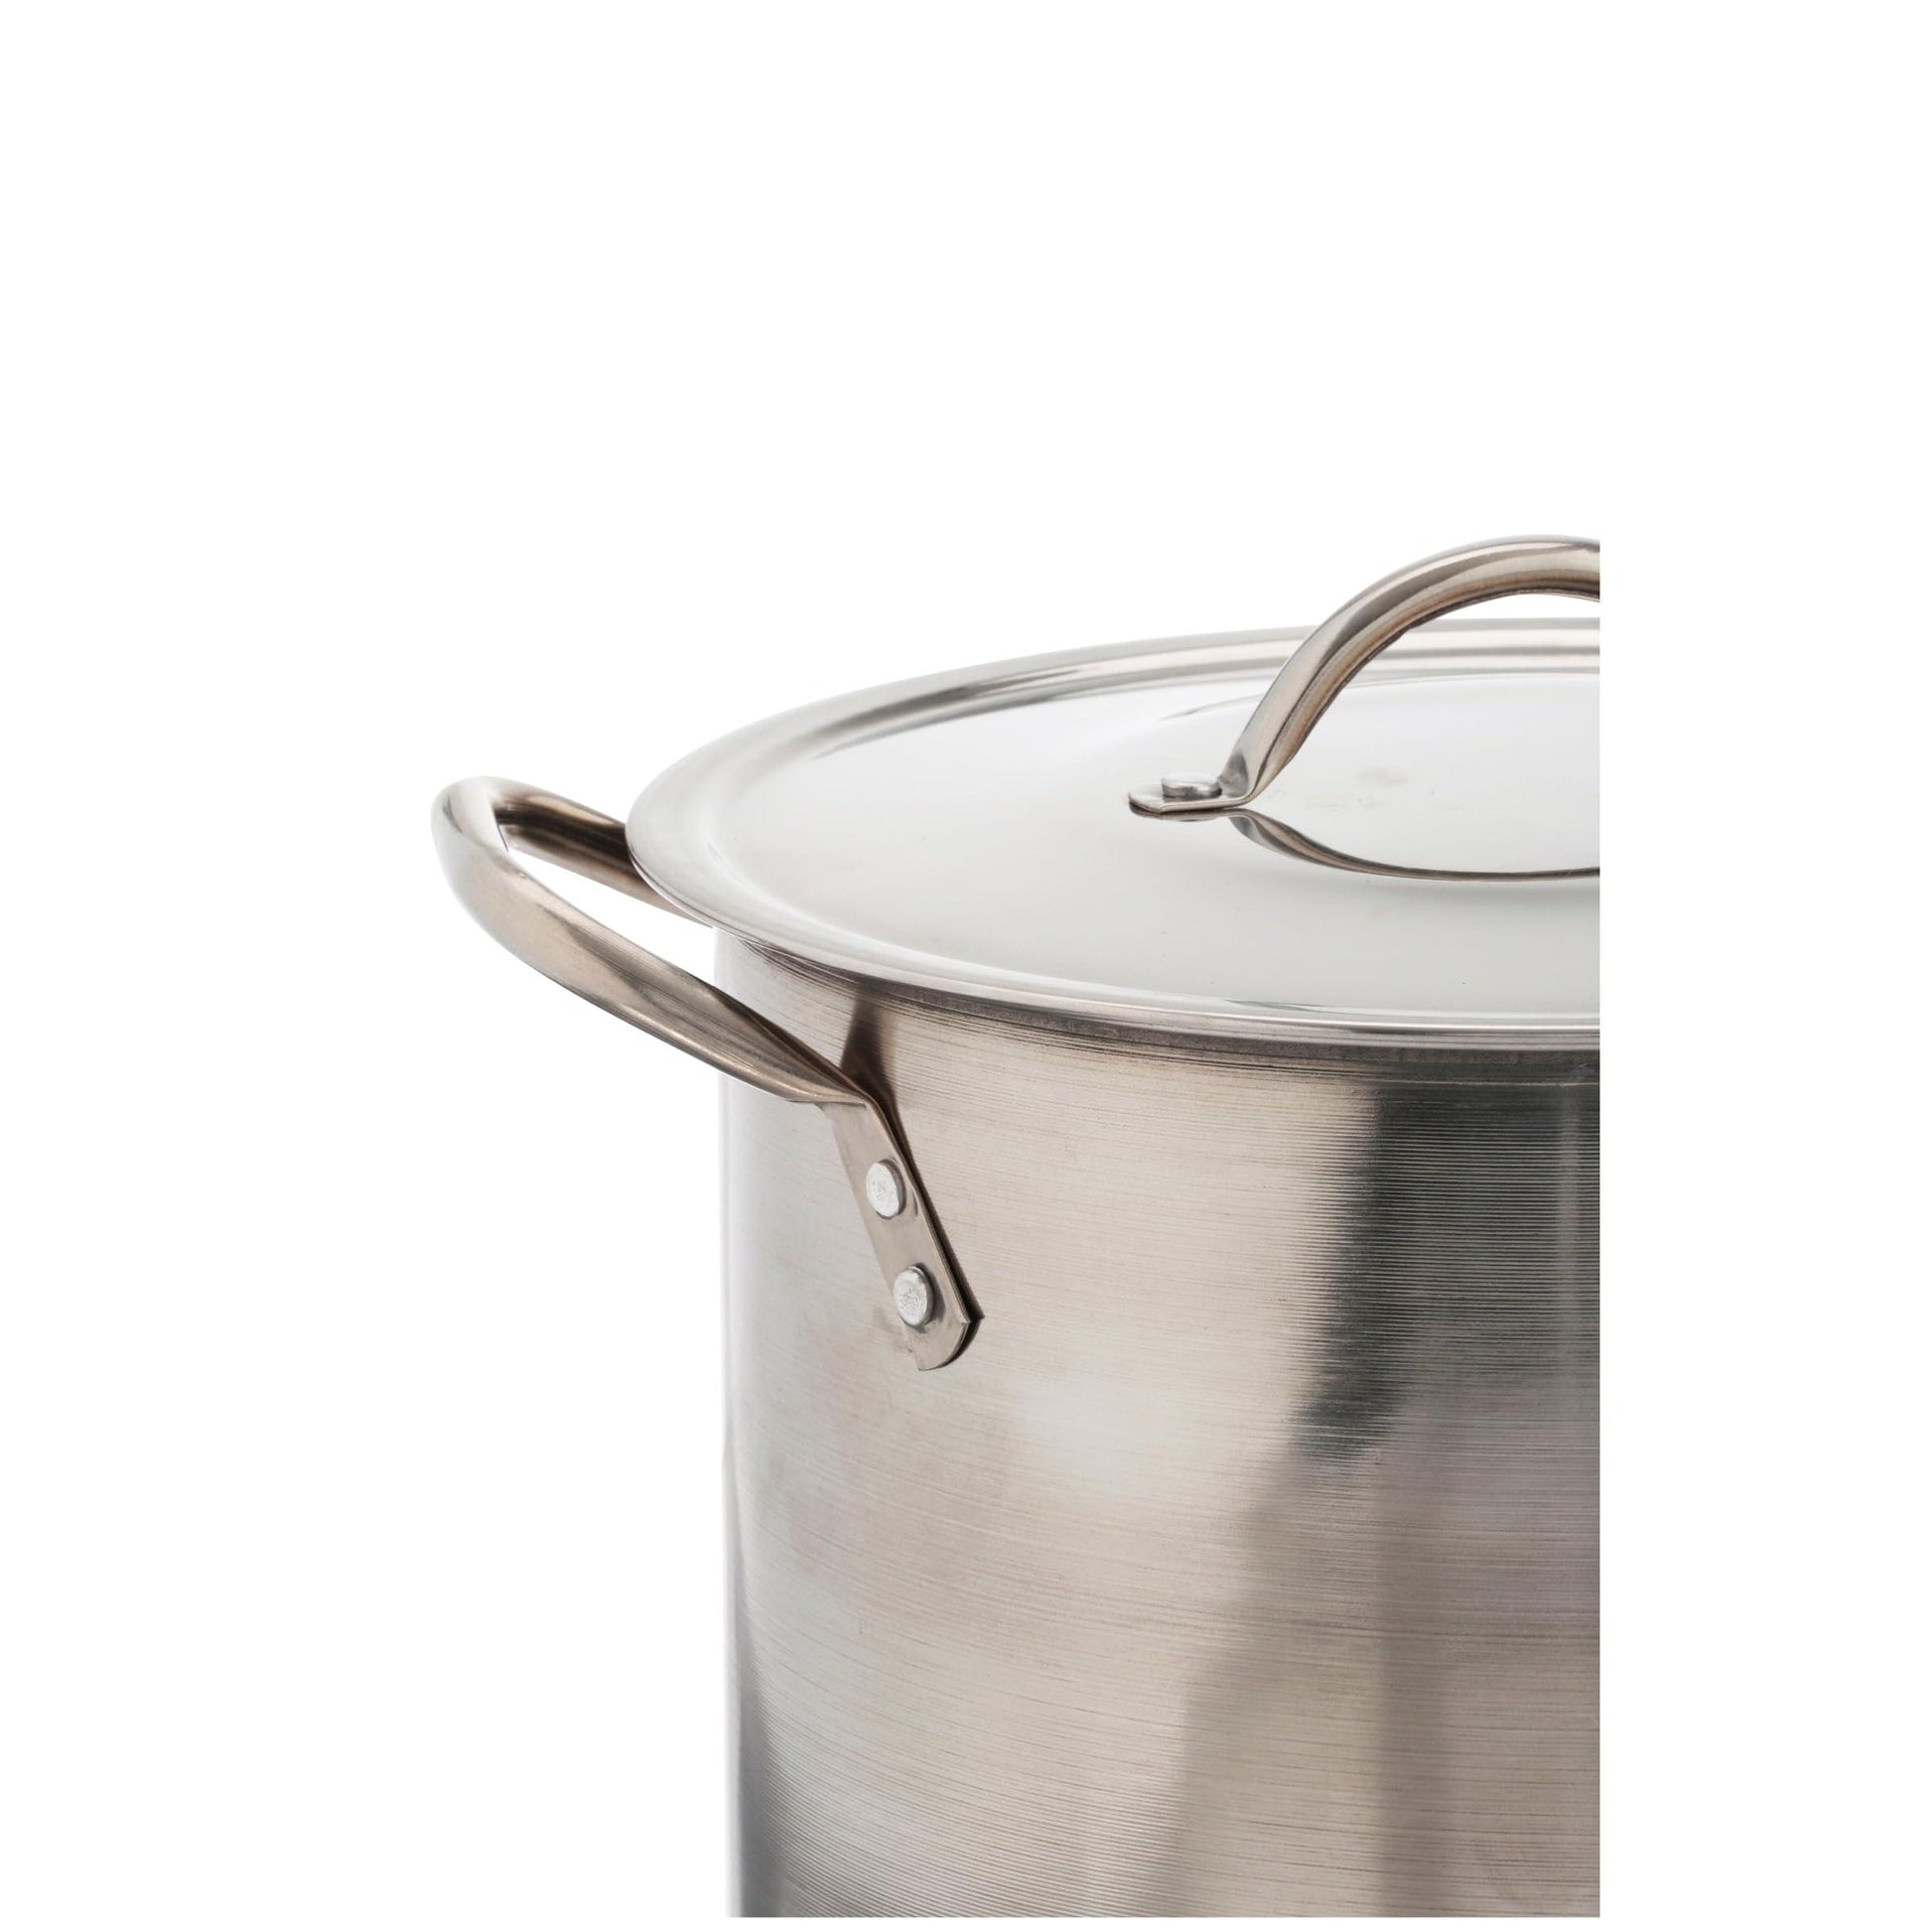 afeme 12-Qt Stainless Steel Stock Pot with Metal Lid - CookCave